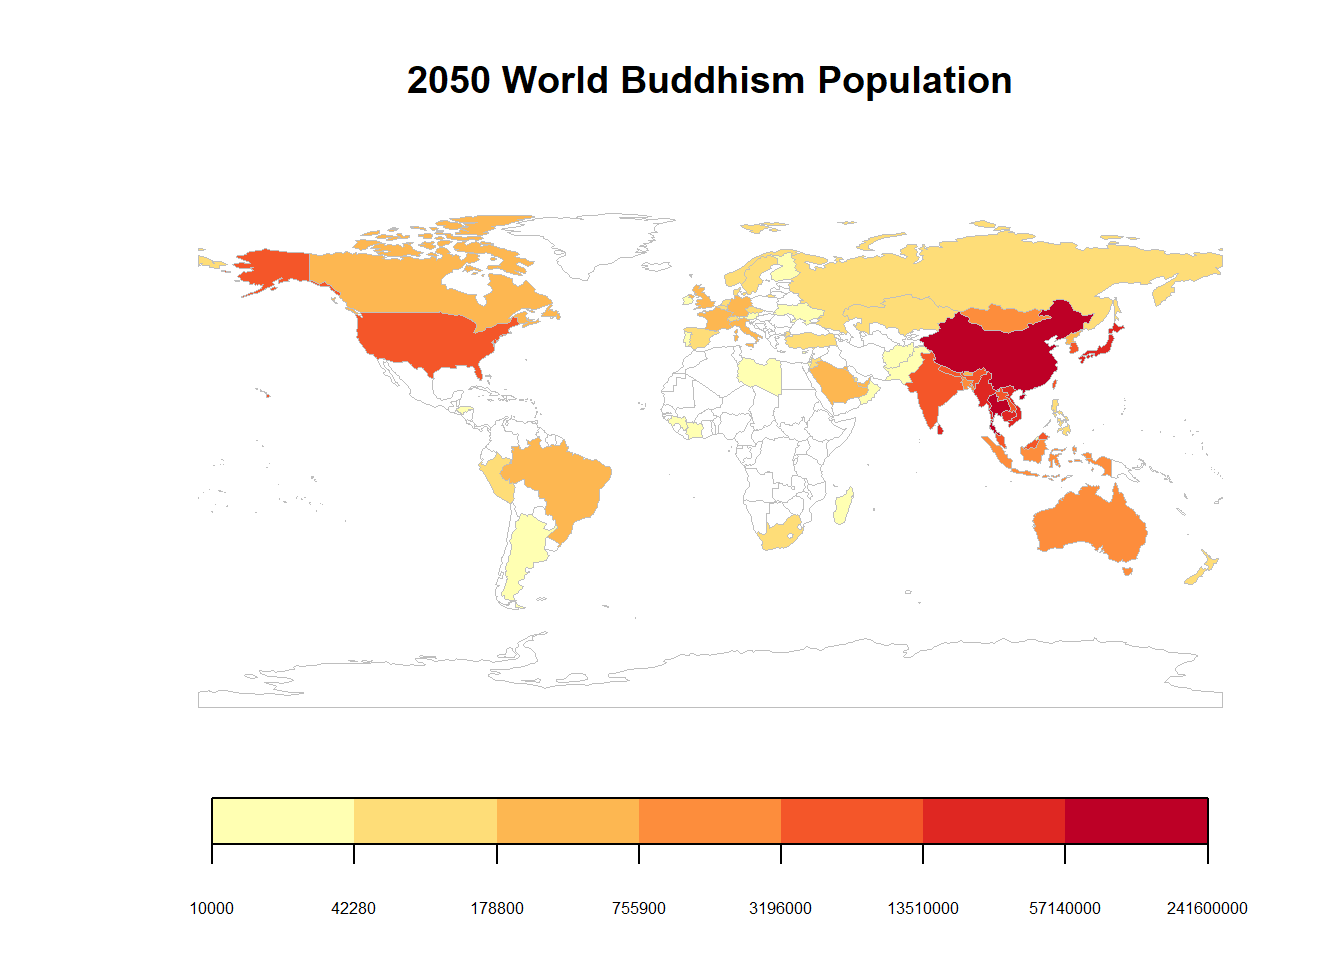 Country Heat Map of Buddhism Population in 2050